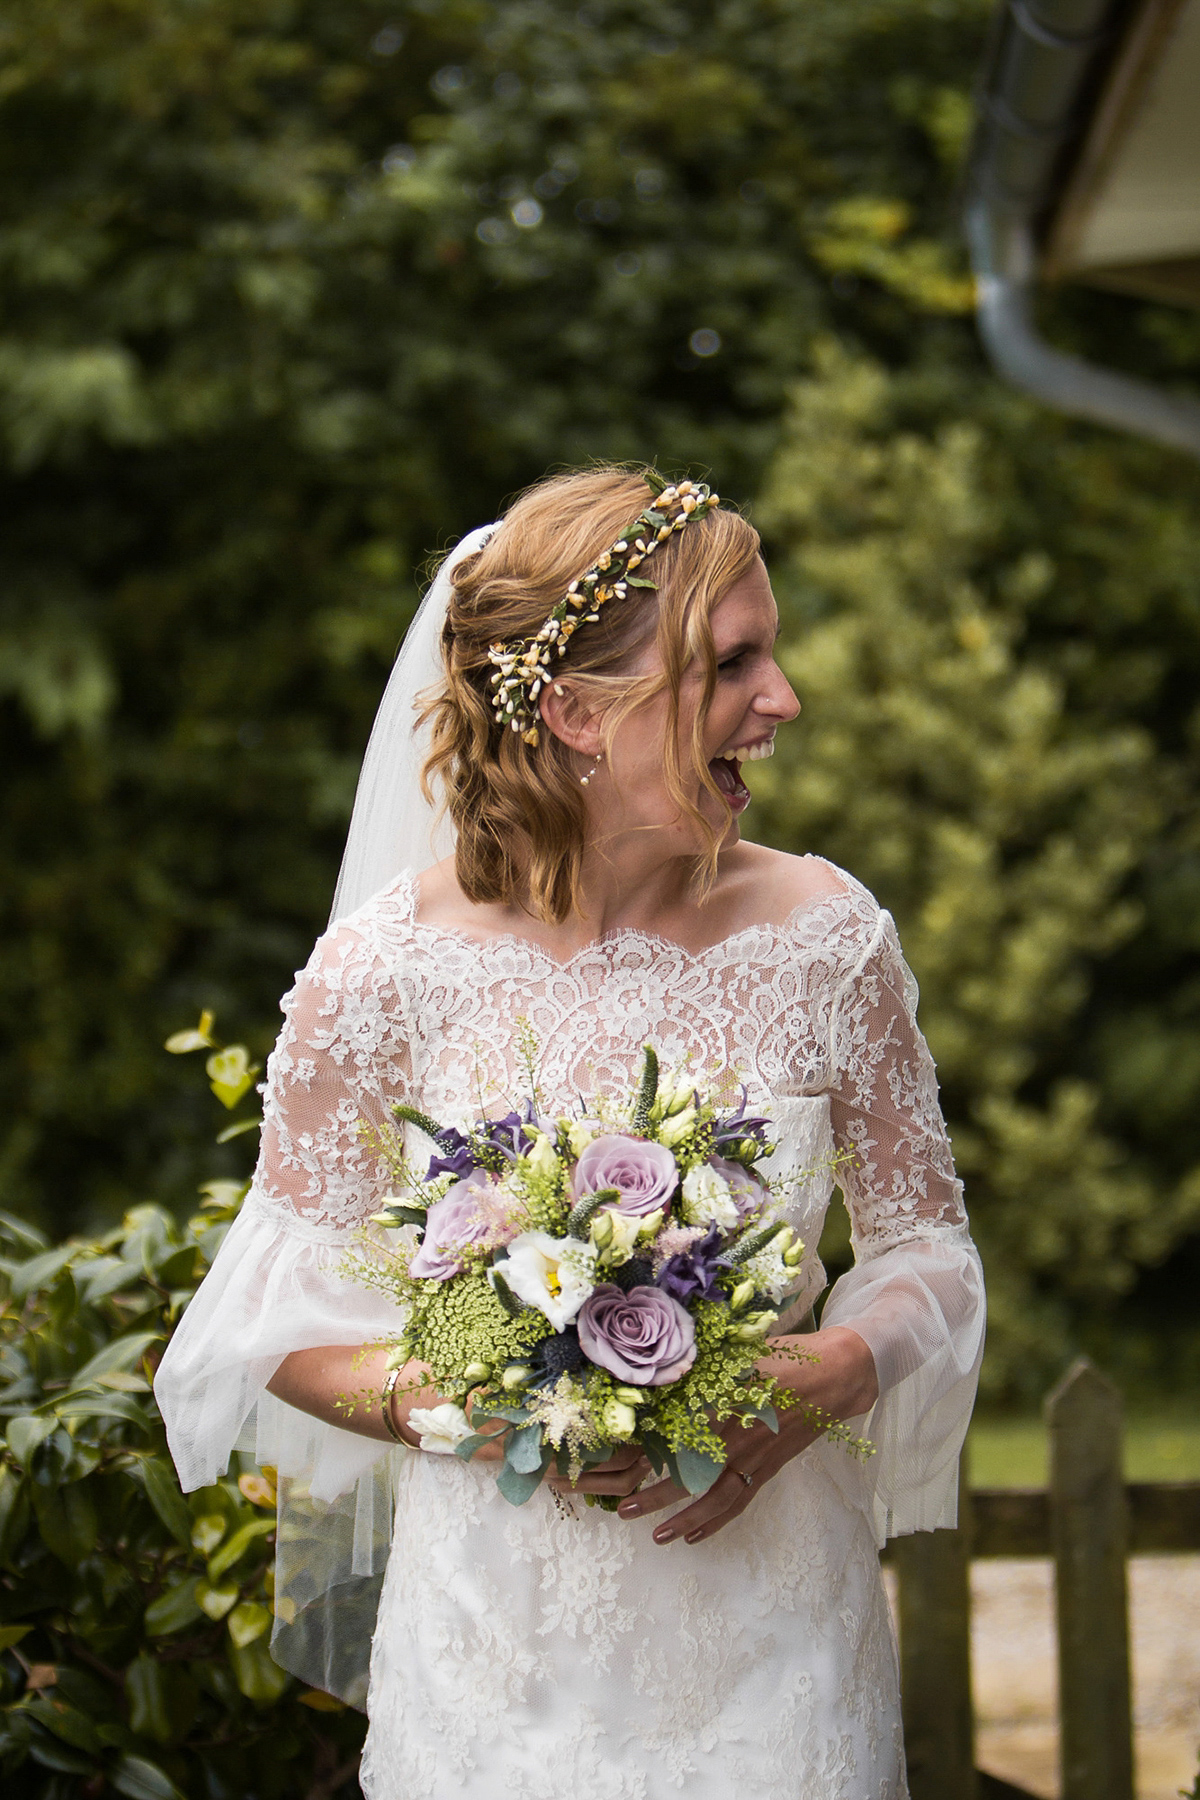 Bride Holly wore the Honor gown by Sally Lacock for her Turkish/Mediterranean and Festival inspired Summer wedding. Photography by Anna Durrant.